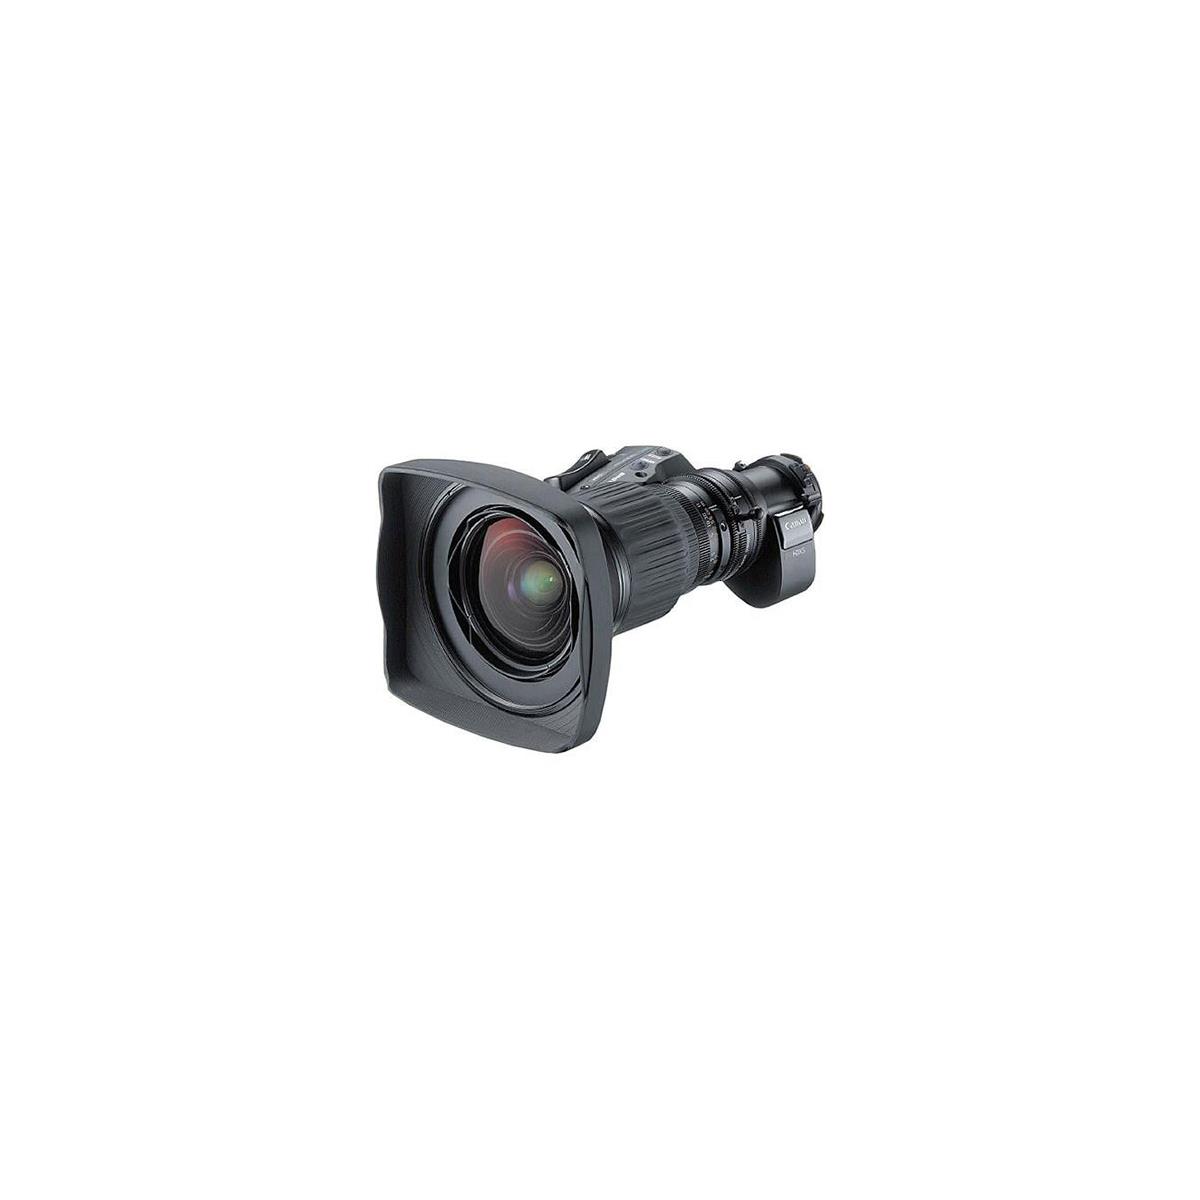 Image of Canon HJ14ex4.3B Wide Angle HDTV Production Lens